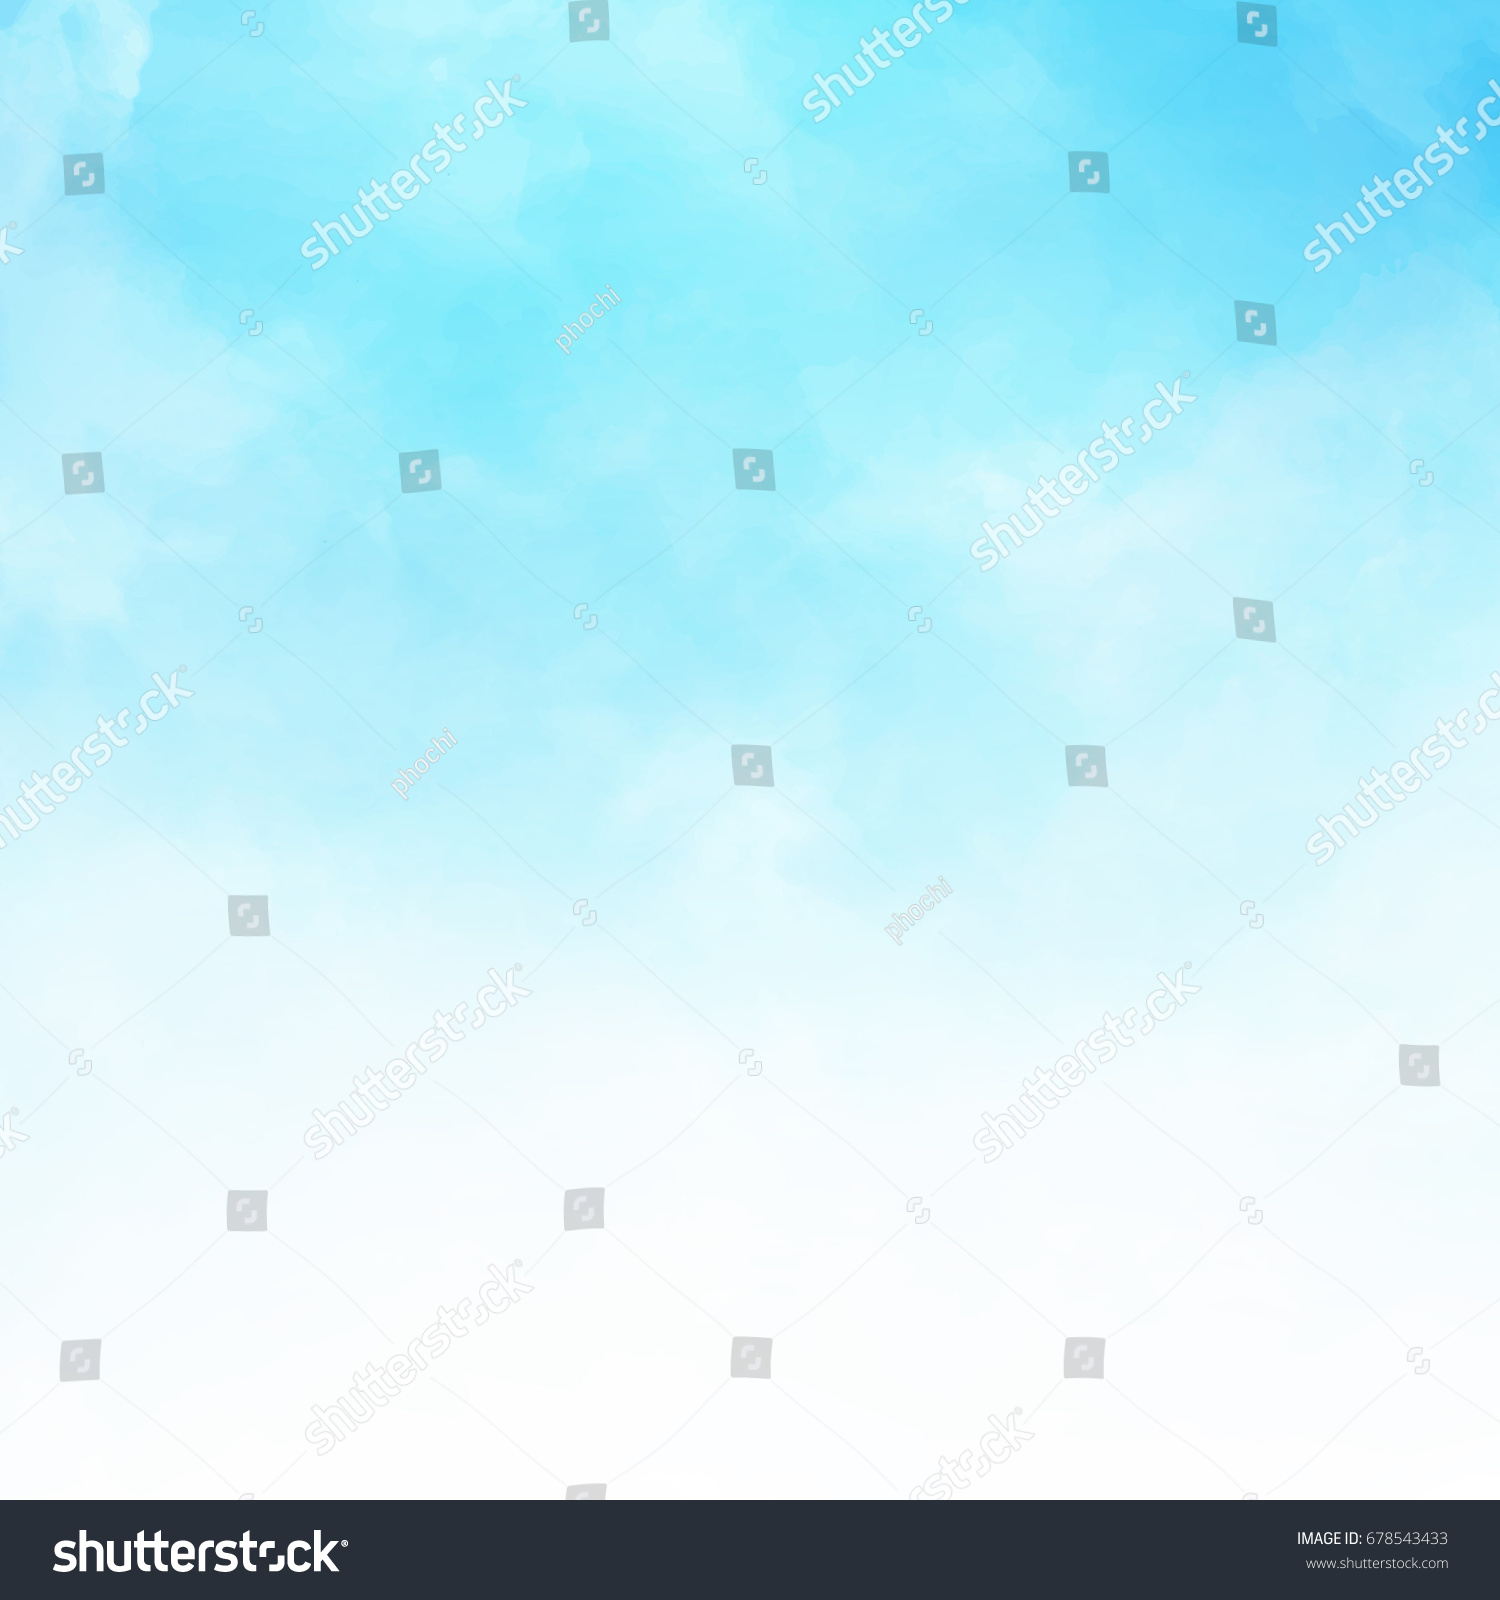 White cloud detail in blue sky vector illustration background with copy space #678543433